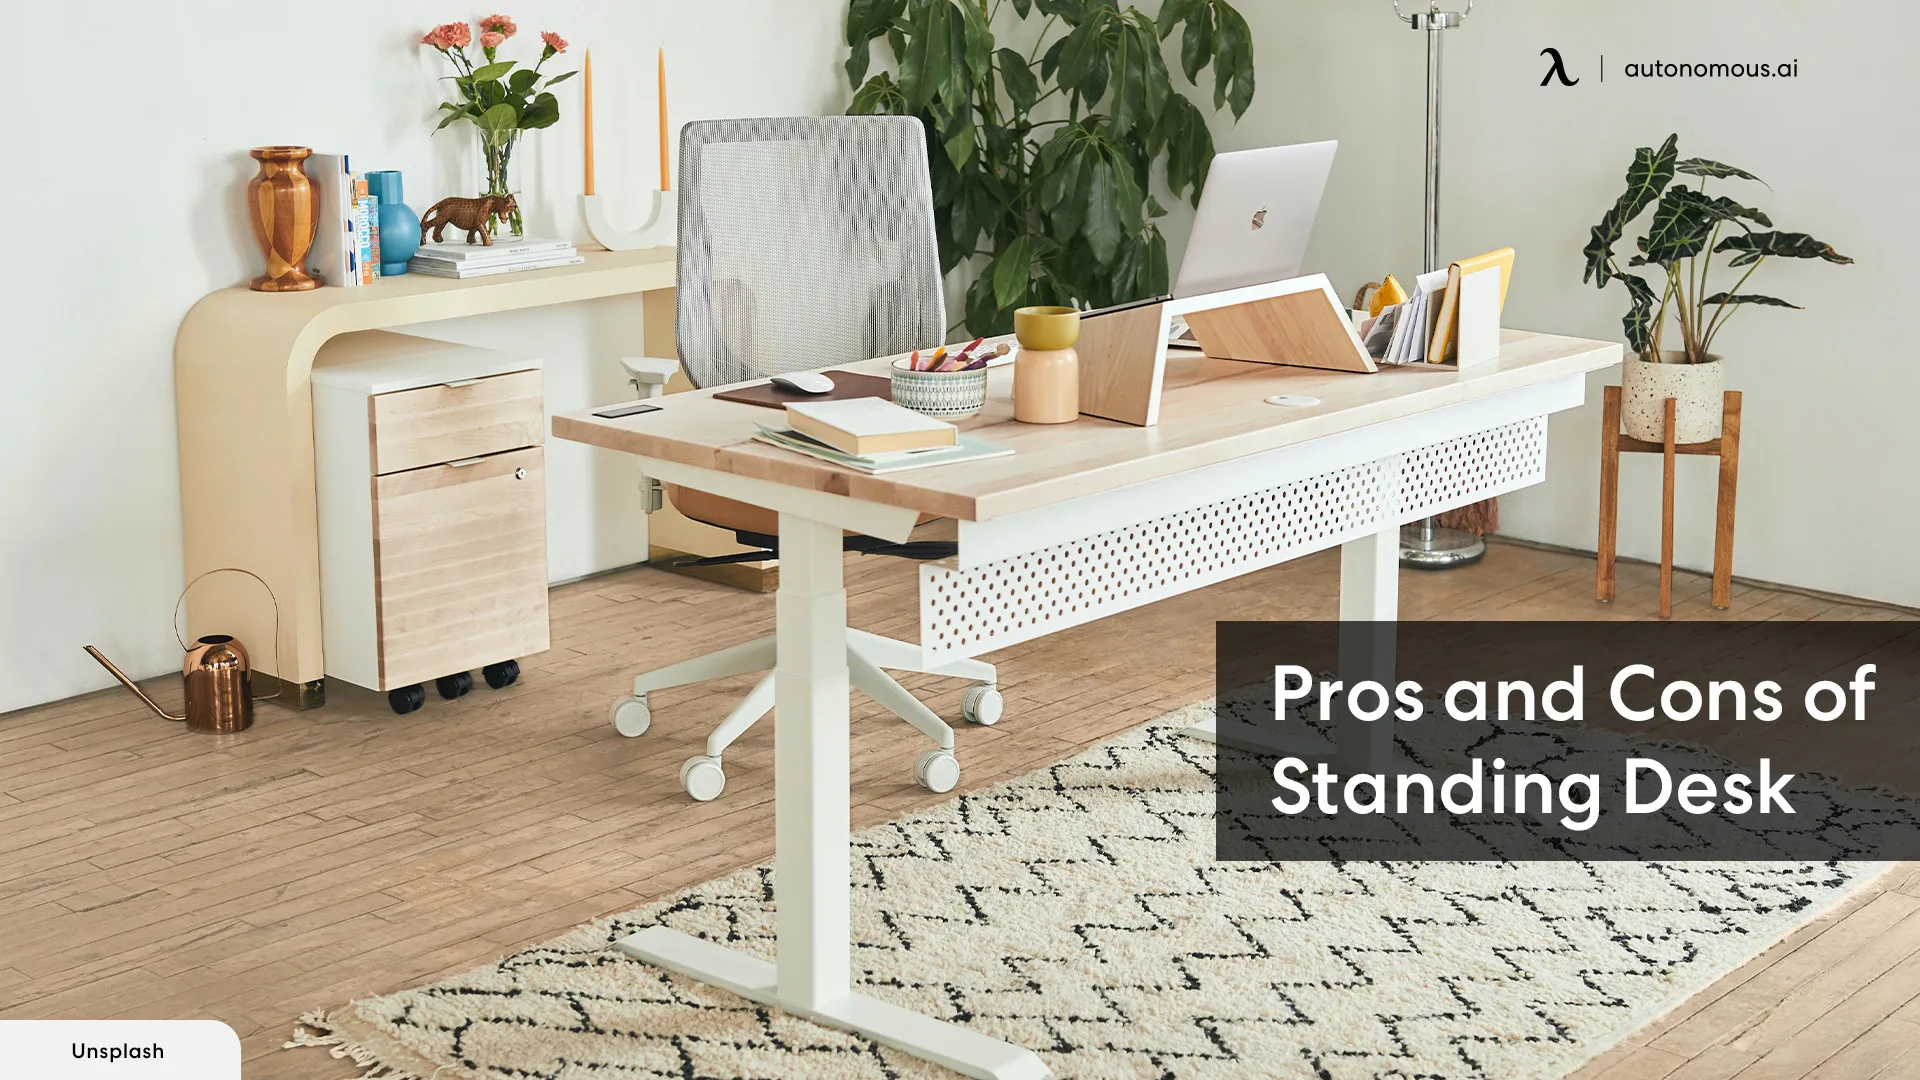 A Complete Guide to Pros and Cons of Standing Desk